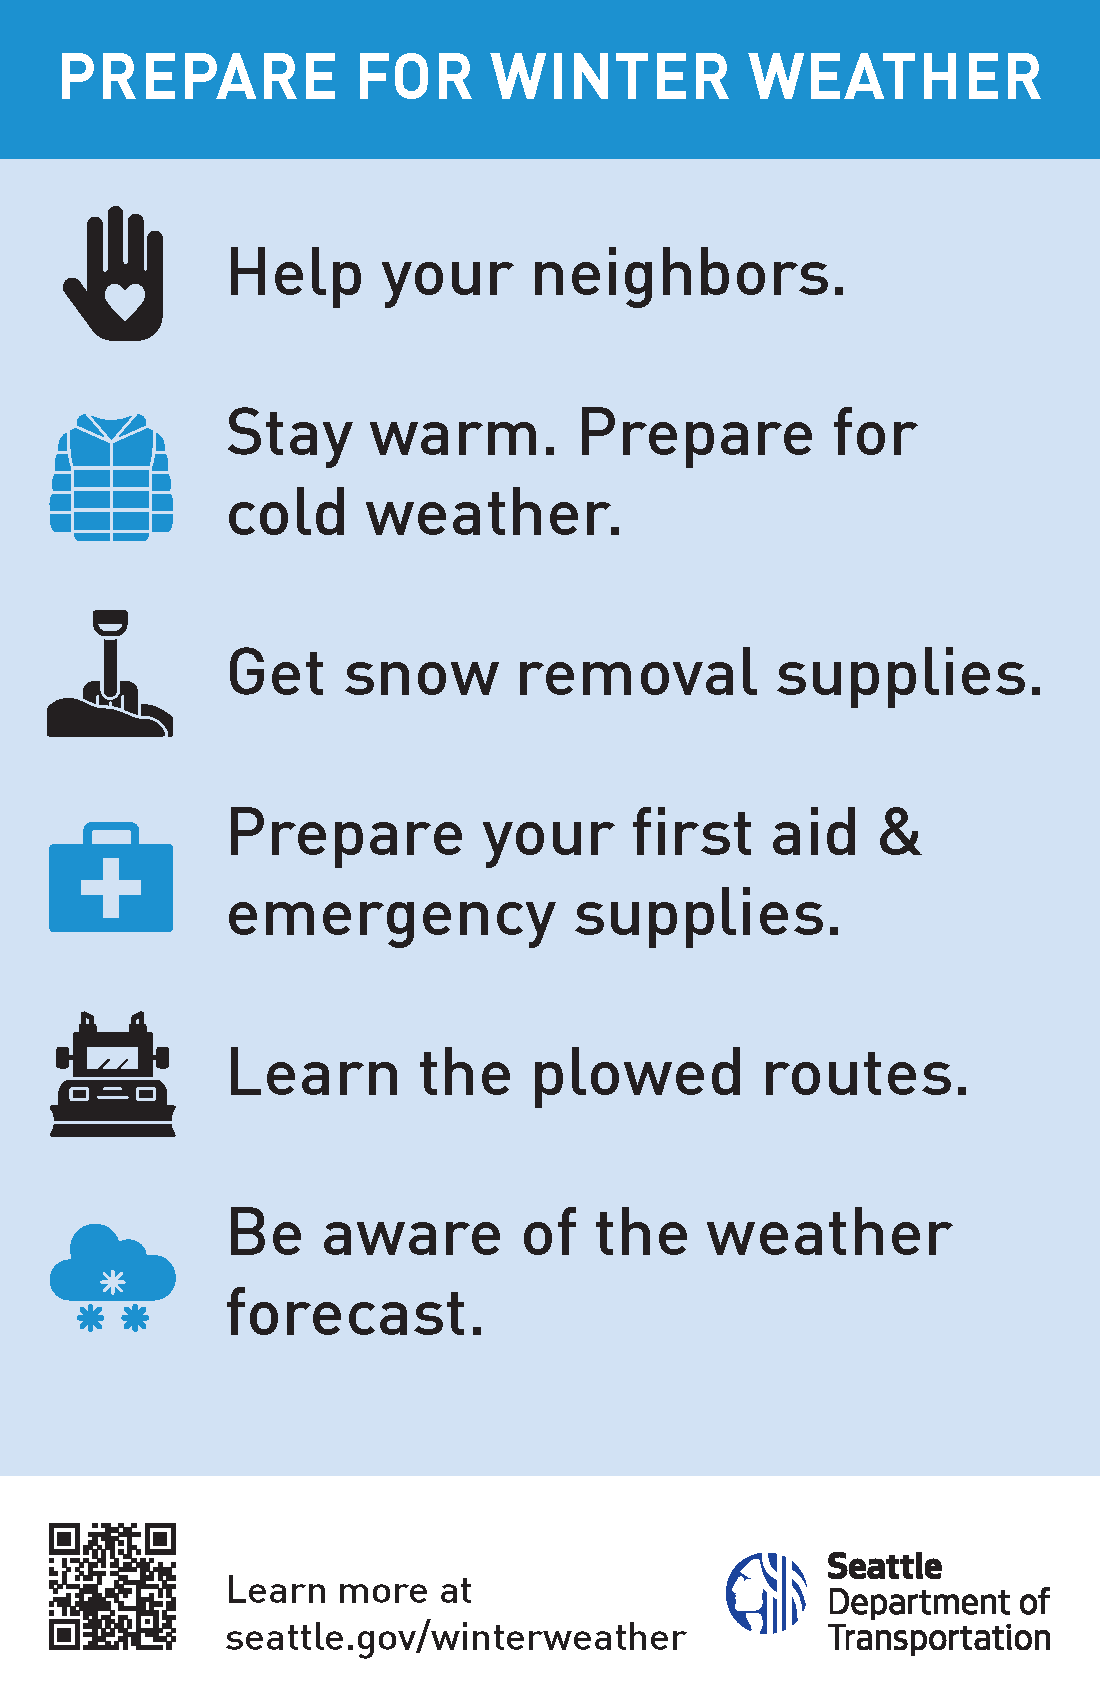 Informational graphic advising Seattle residents and travelers how to prepare for winter weather in advance. The graphic includes several smaller icons and text describing several ways to prepare.